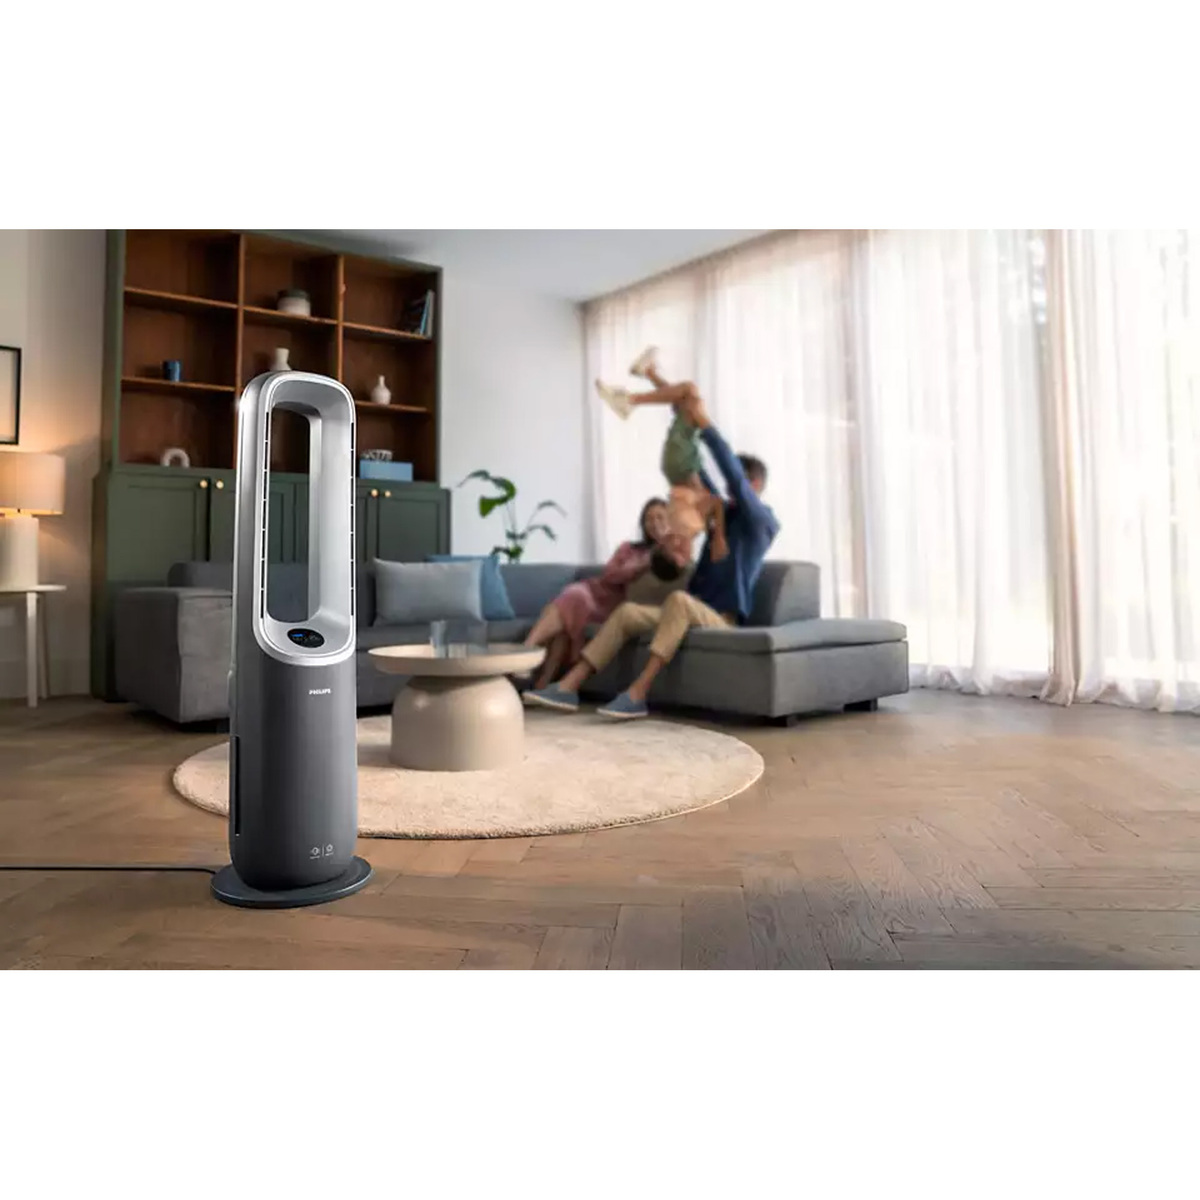 Philips Air Performer 8000 Series 3-in-1 Air Purifier, Fan and Heater, Grey/Silver, AMF870/35